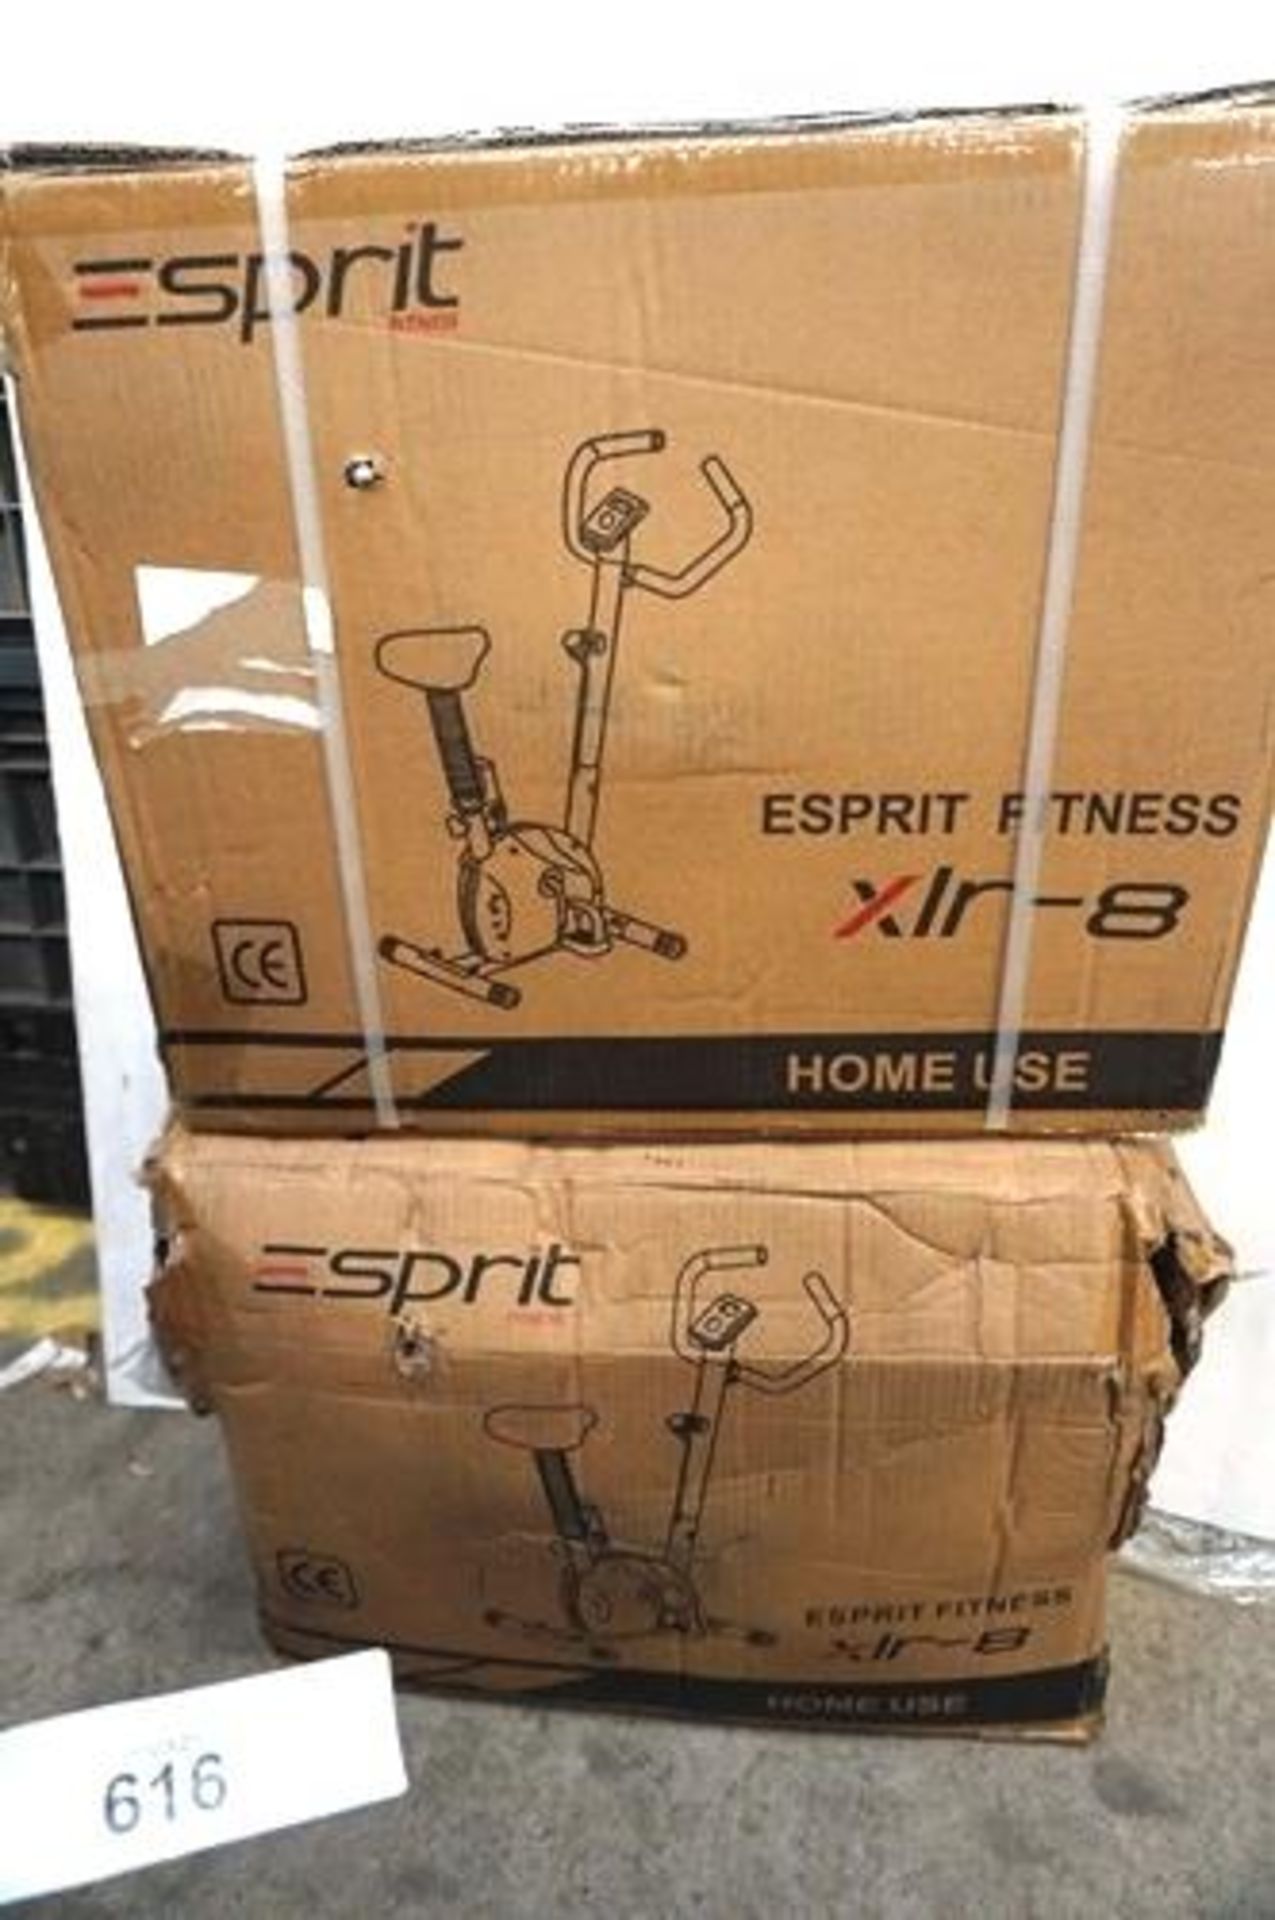 2 x Esprit Fitness XLR-8 exercise bike, 1 x black and 1 x red - Sealed new in box, 1 box tatty (